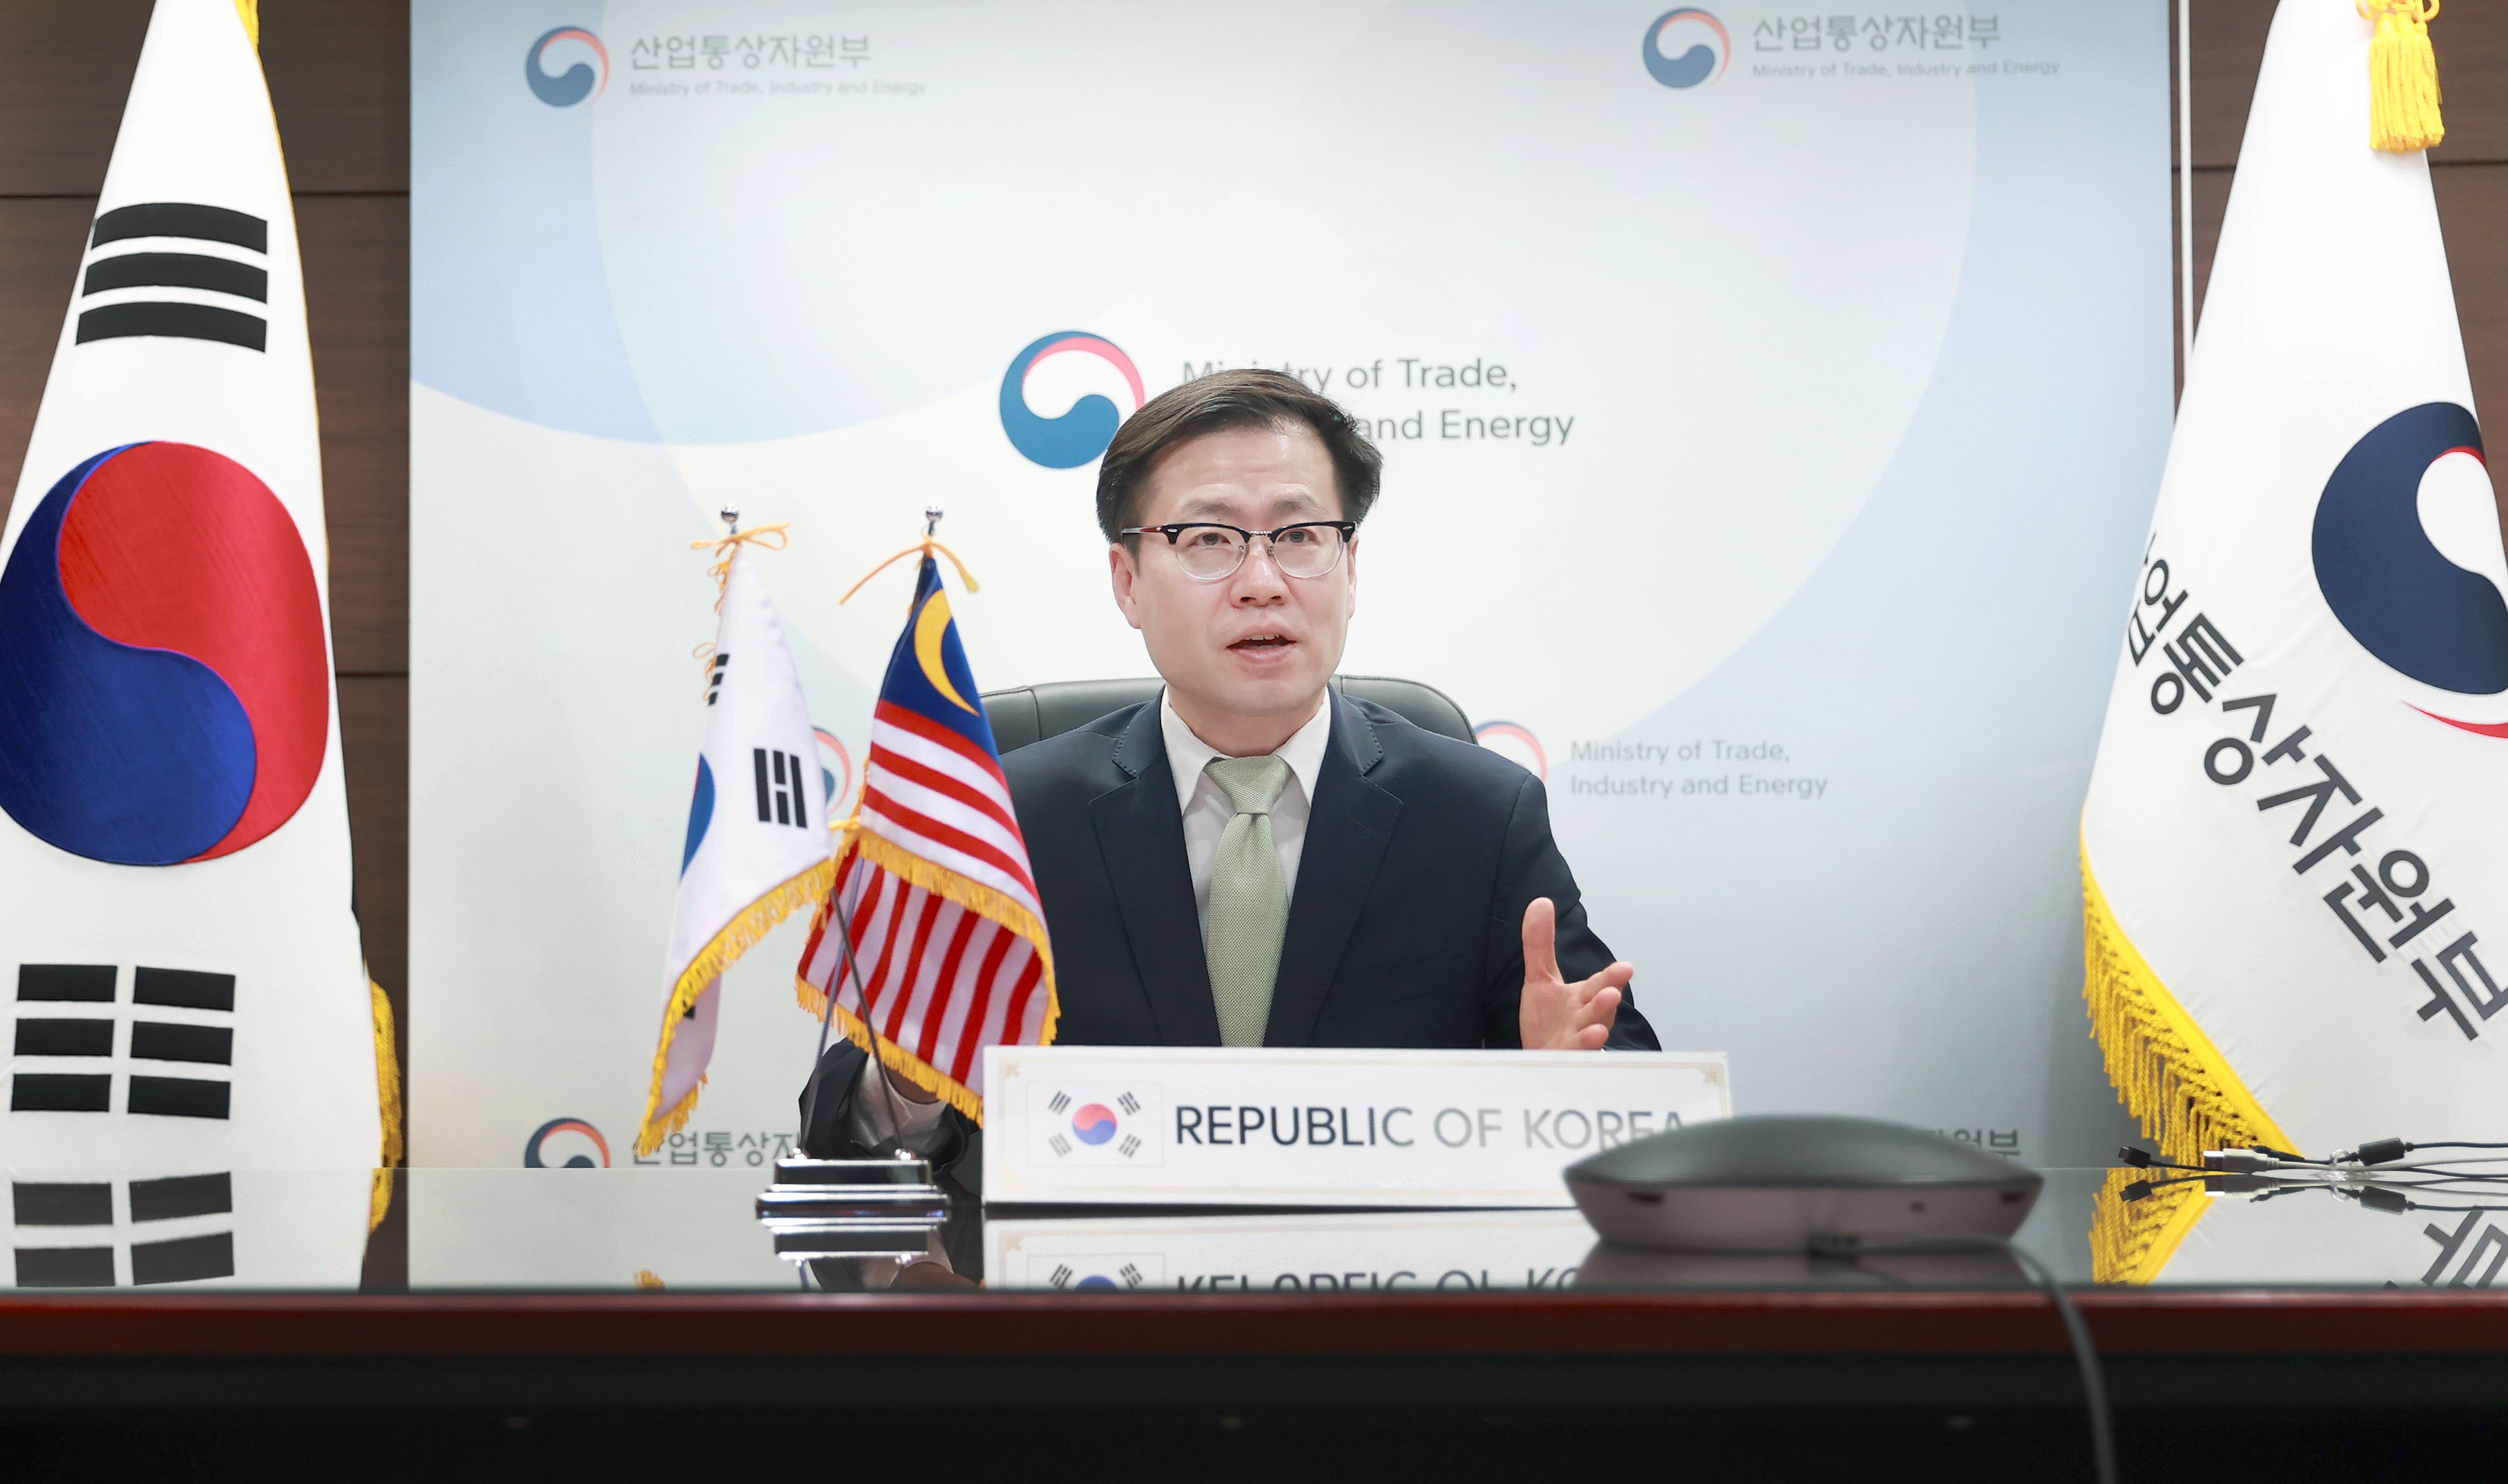 Korea and Malaysia hold trade talks on CPTPP and supply chain cooperation